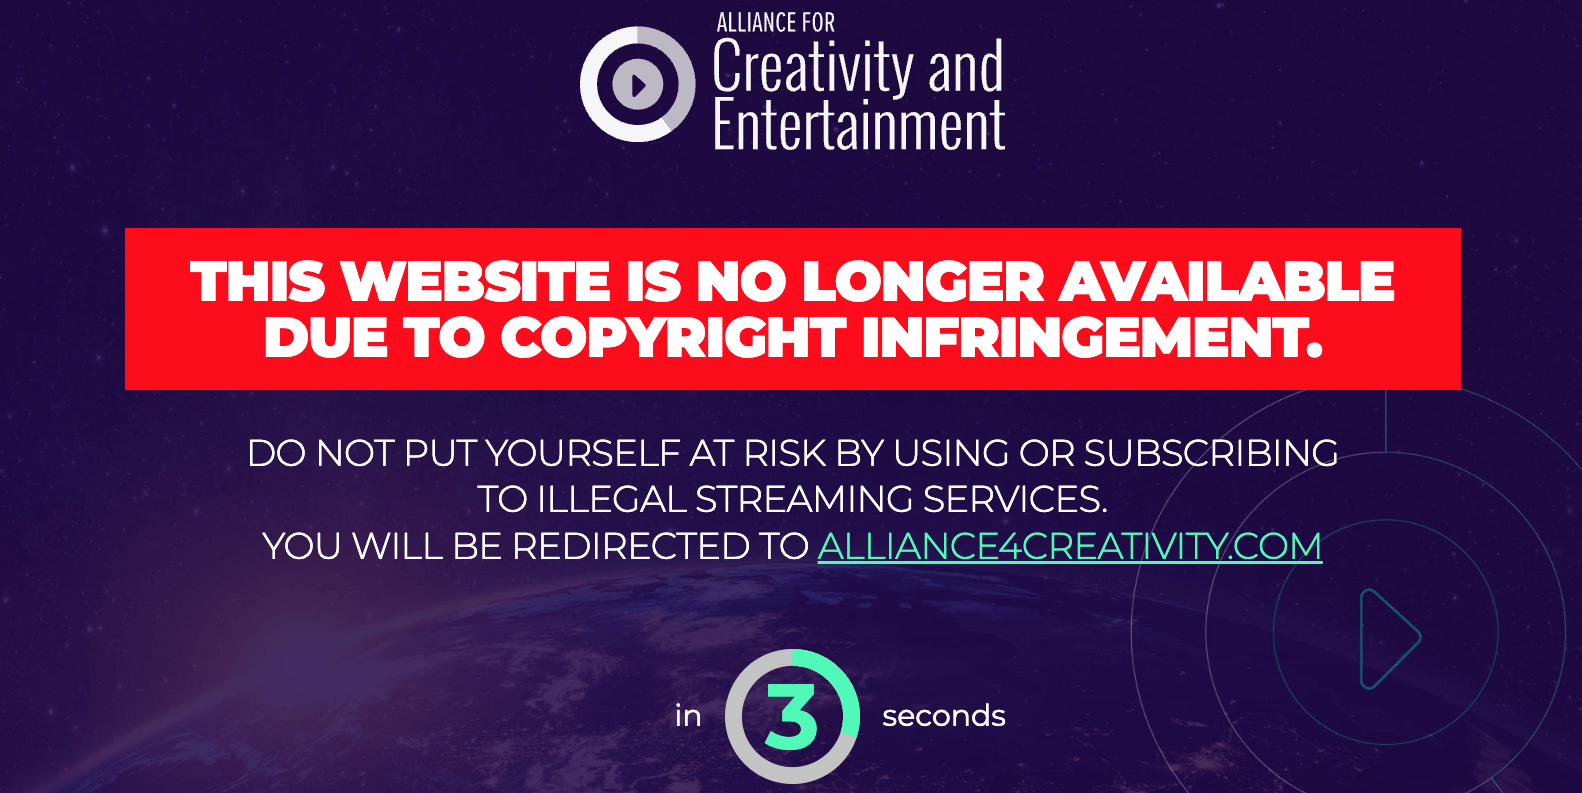 The Alliance for Creativity and Entertainment (ACE) is a global anti-piracy organization responsible for shutting down hundreds of pirate streaming sites.